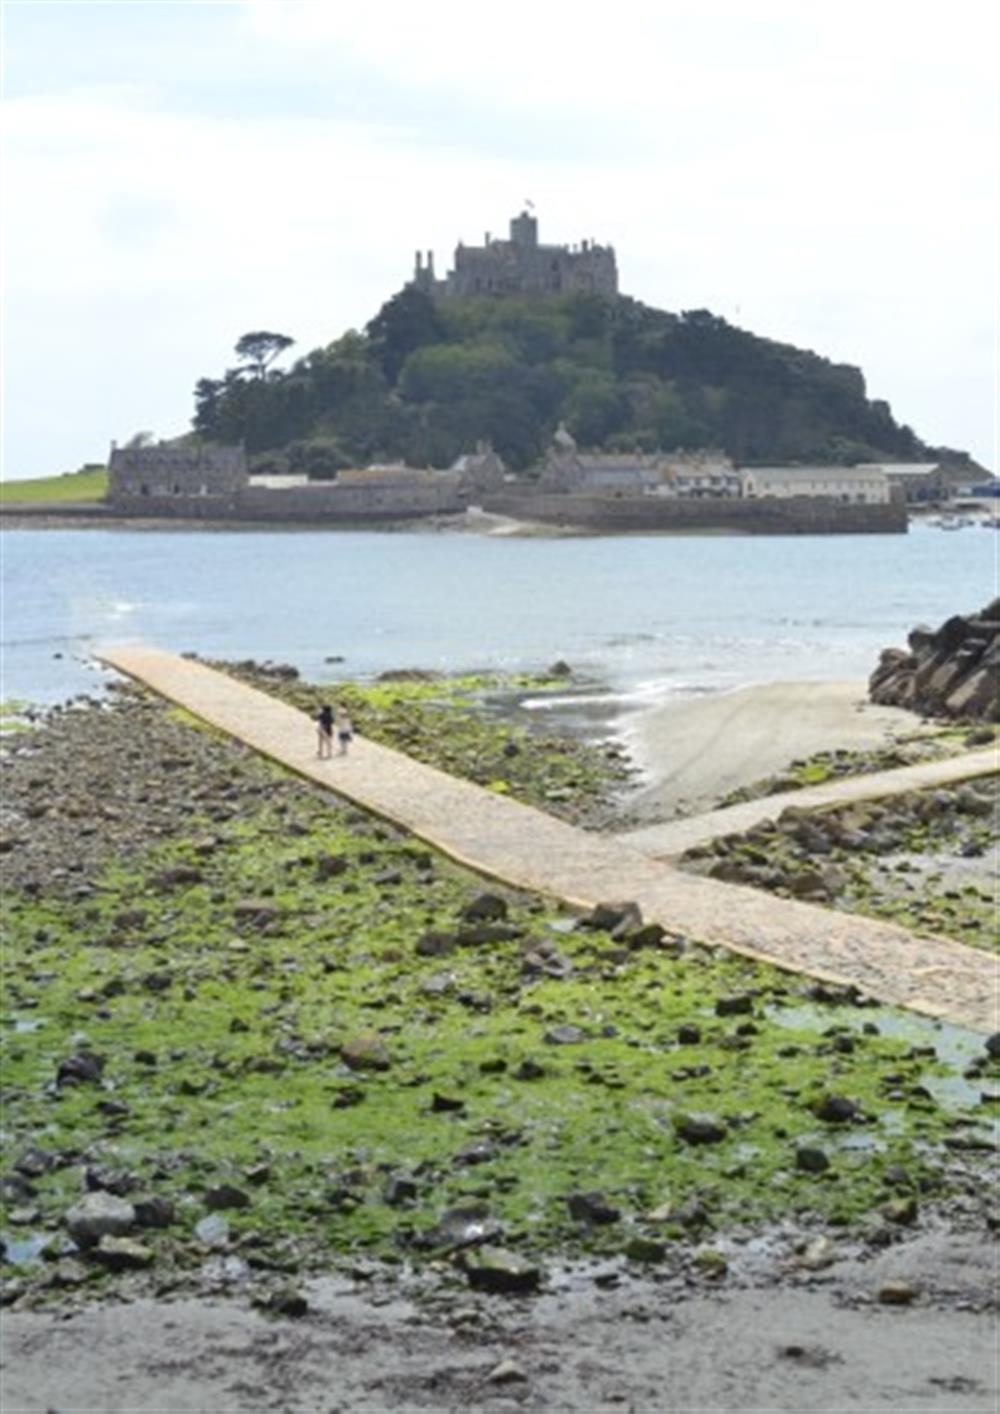 St Michael's Mount is a 45 minute drive. at Portscatho in Helford Passage